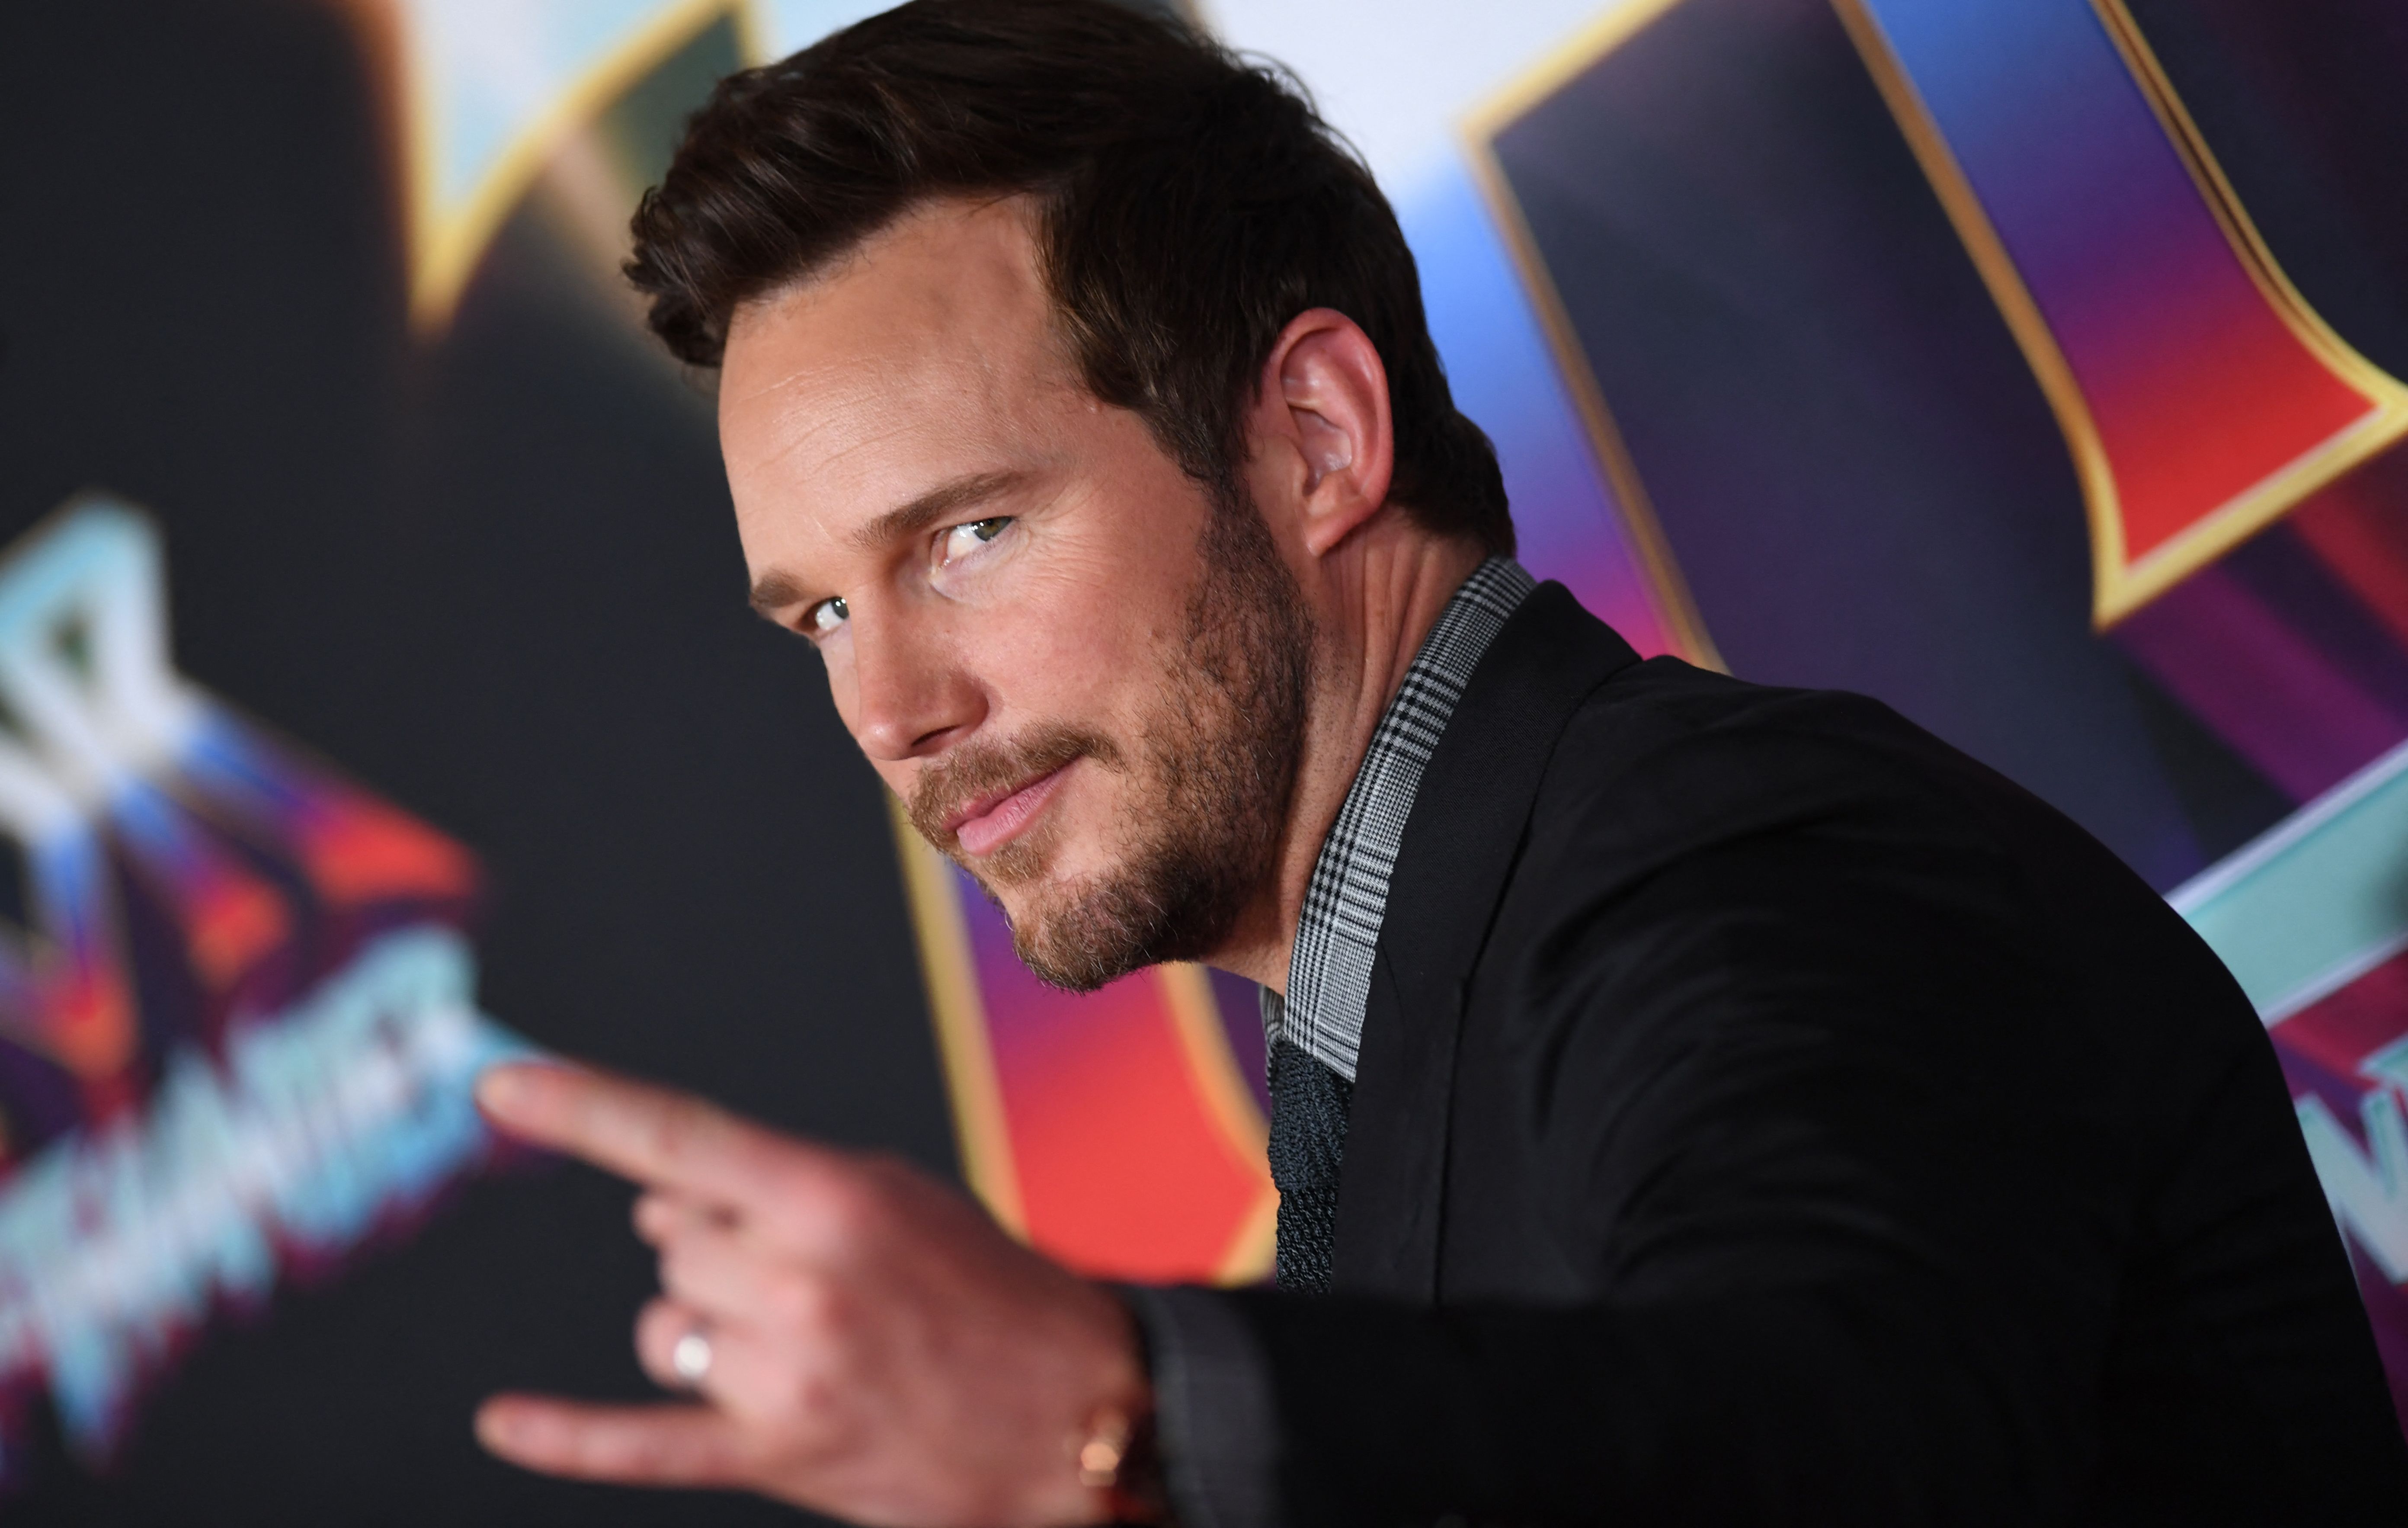 Chris Pratt on His Marvel Future After 'Guardians of the Galaxy